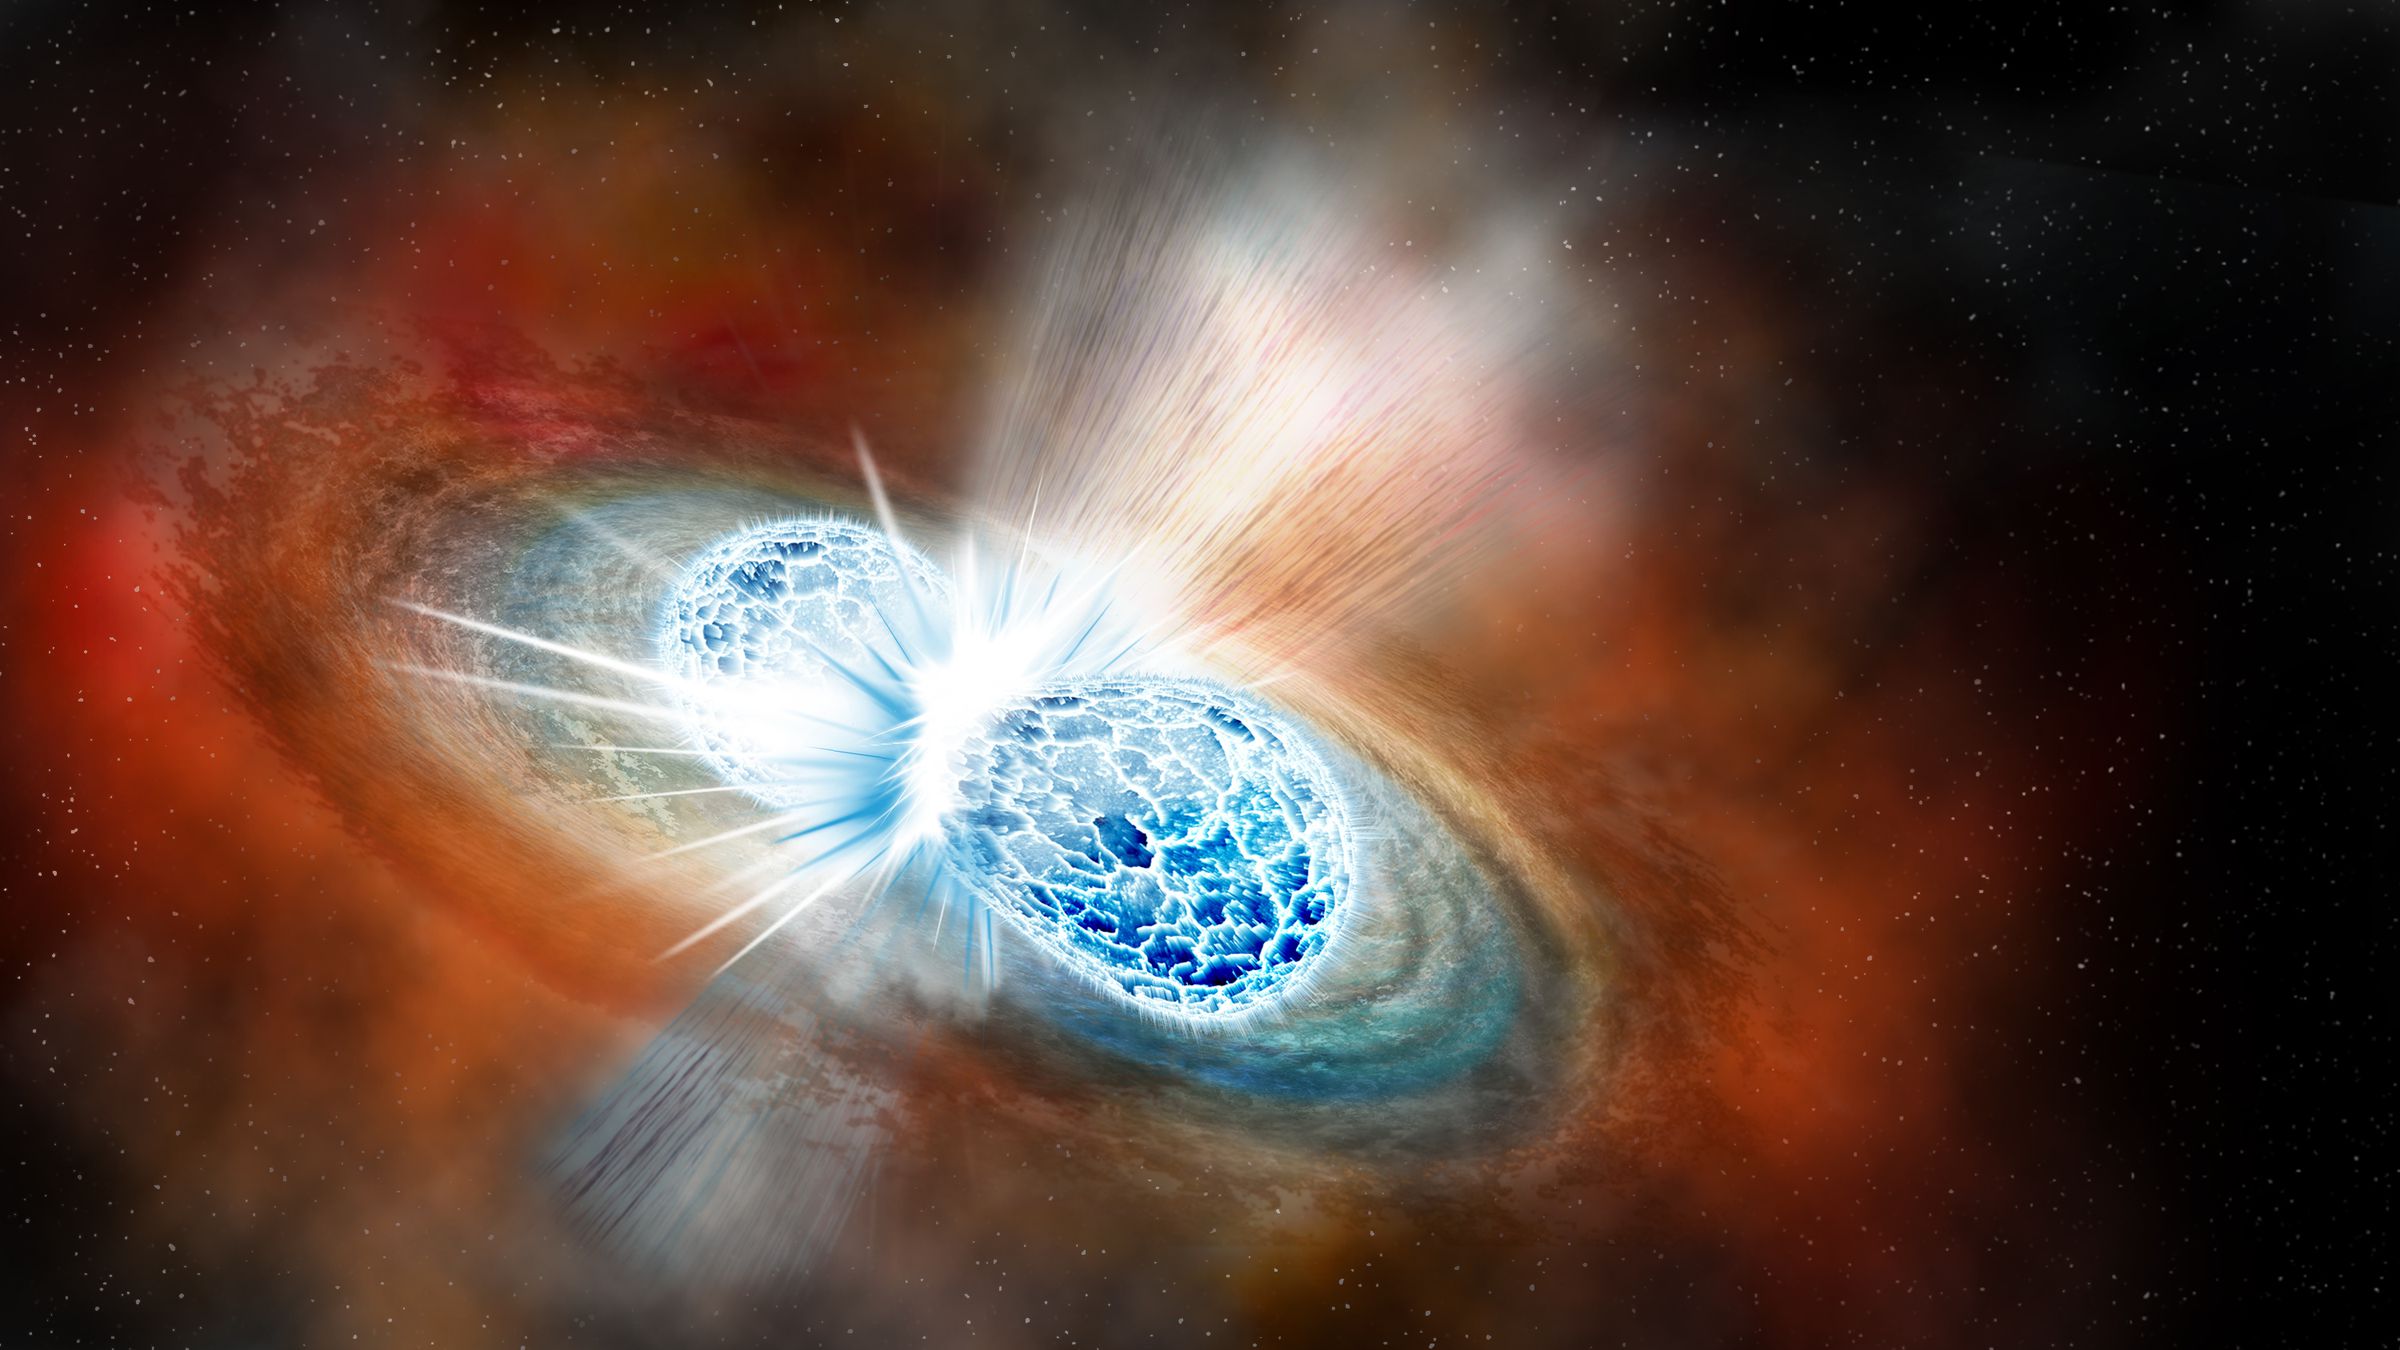 A rendering of the neutron star merger at the moment of impact.